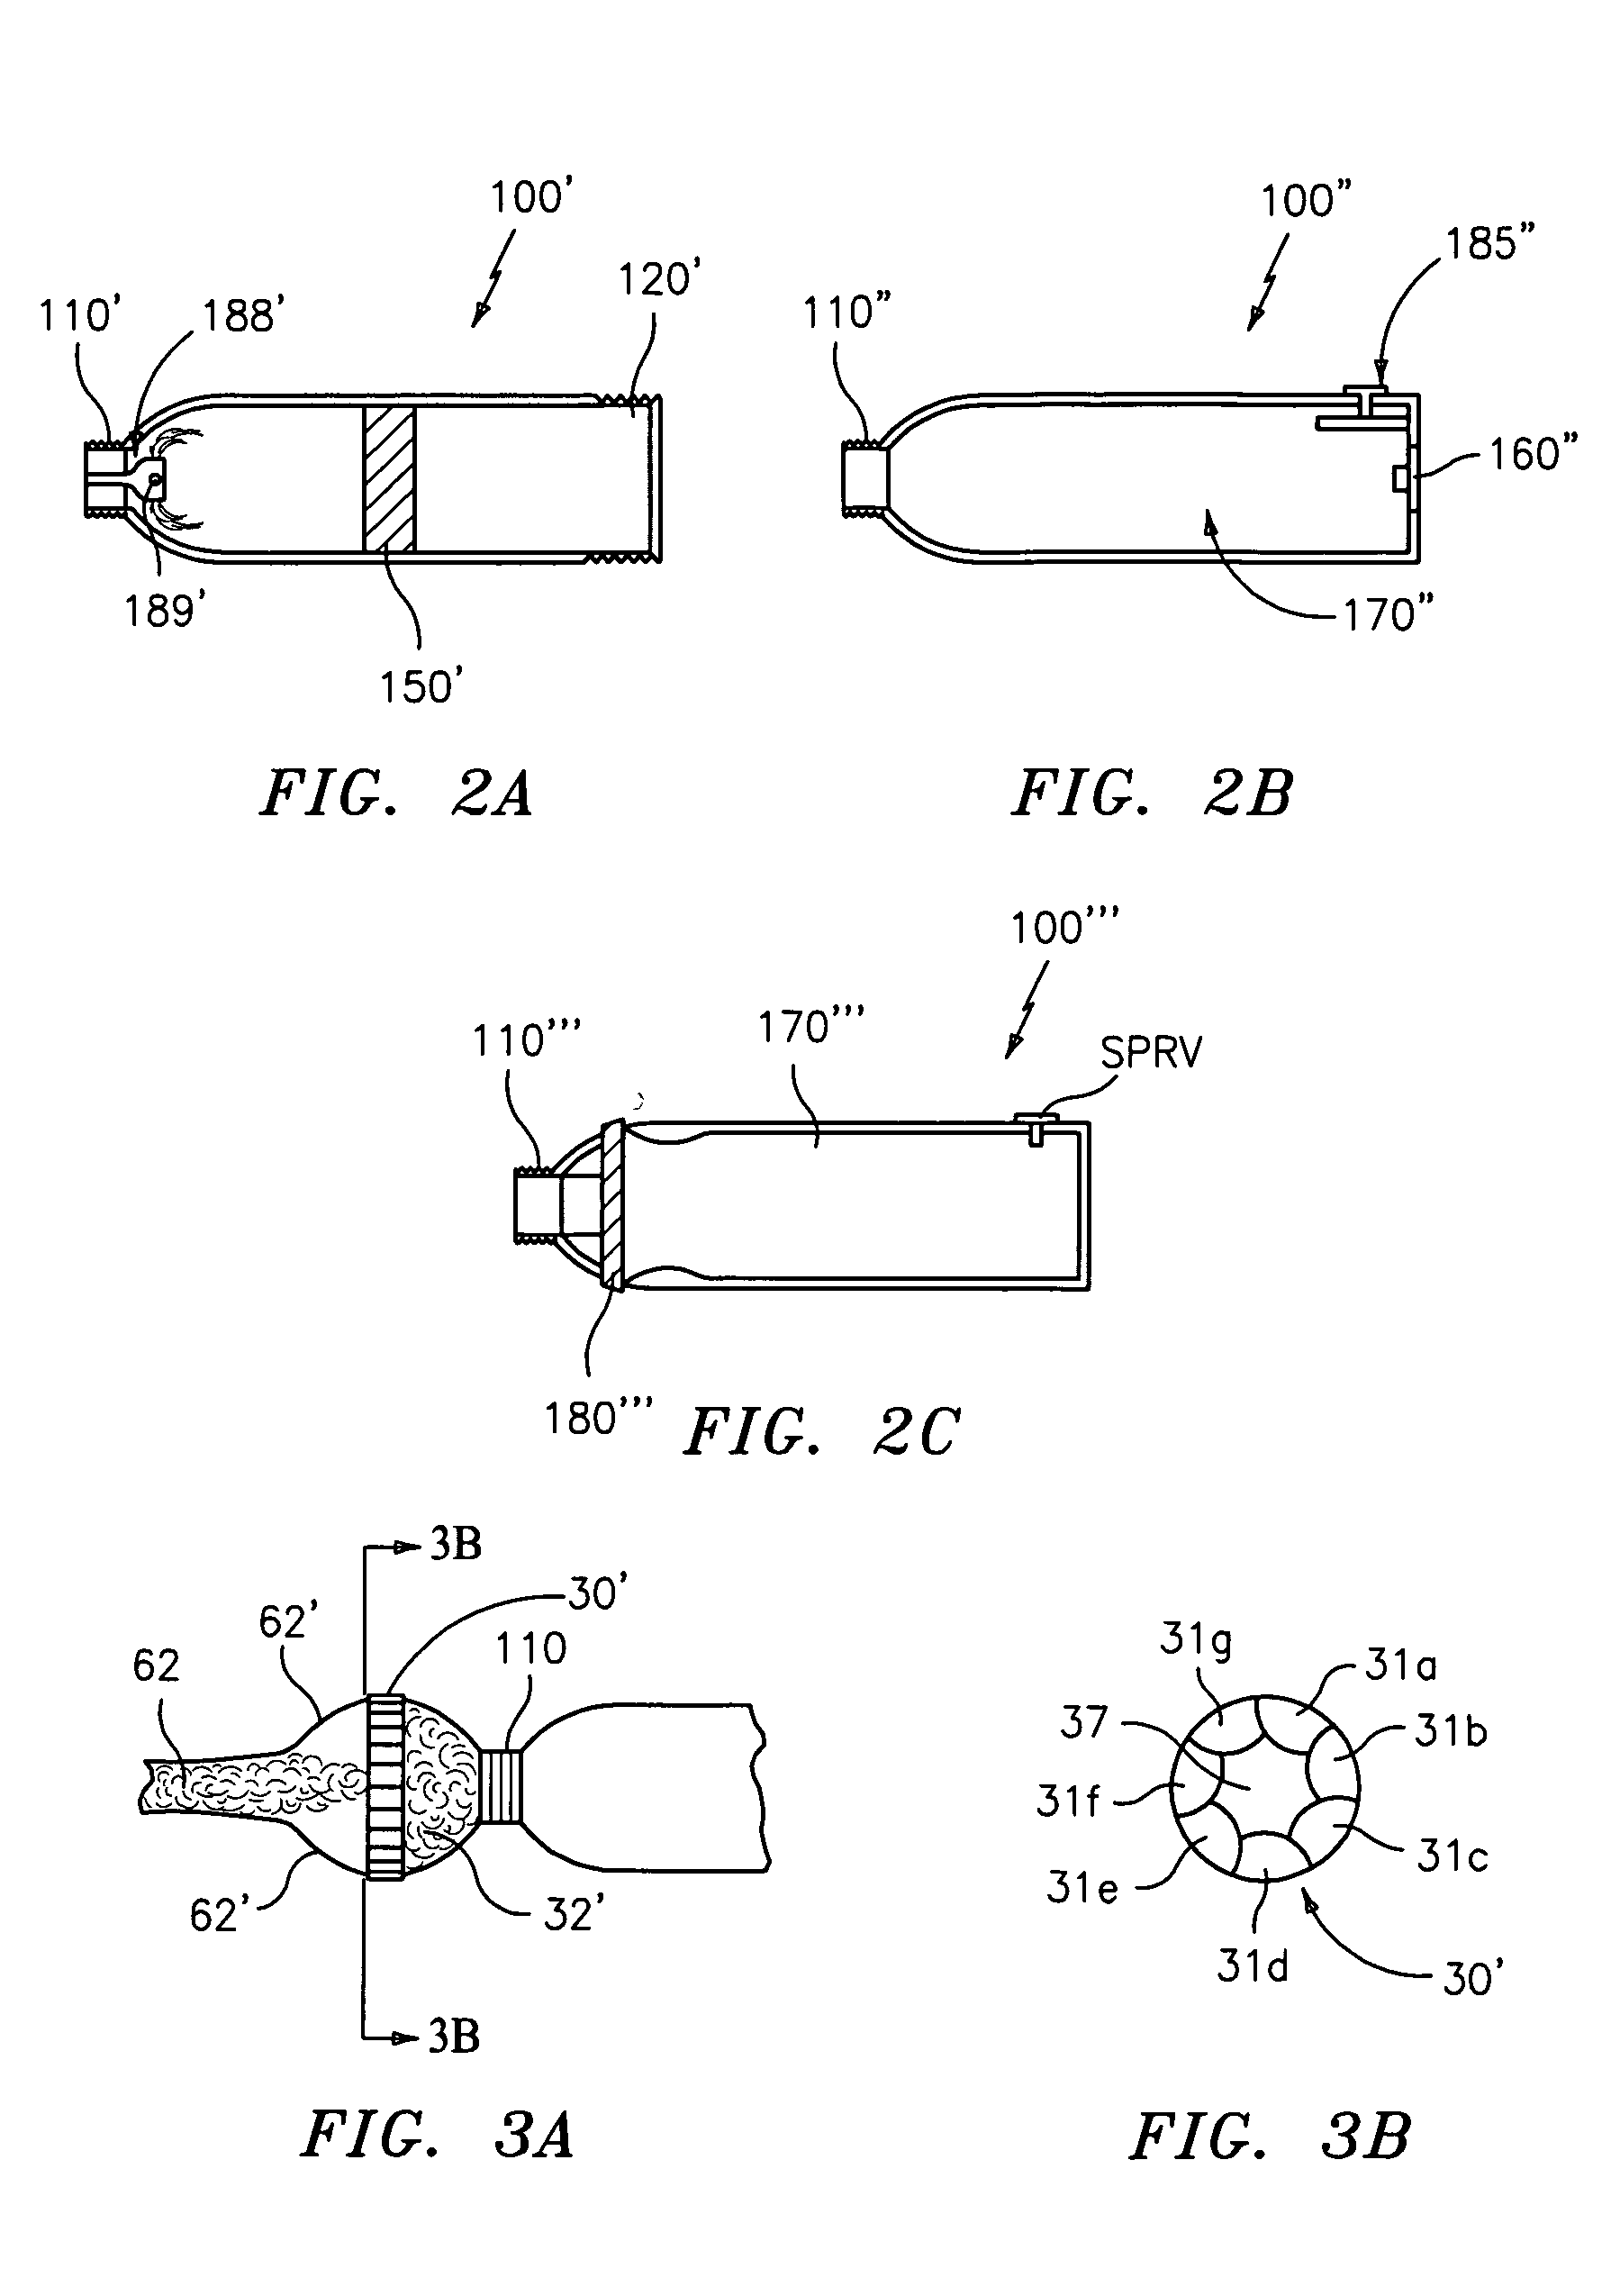 Self contained, gas-enhanced surgical instrument